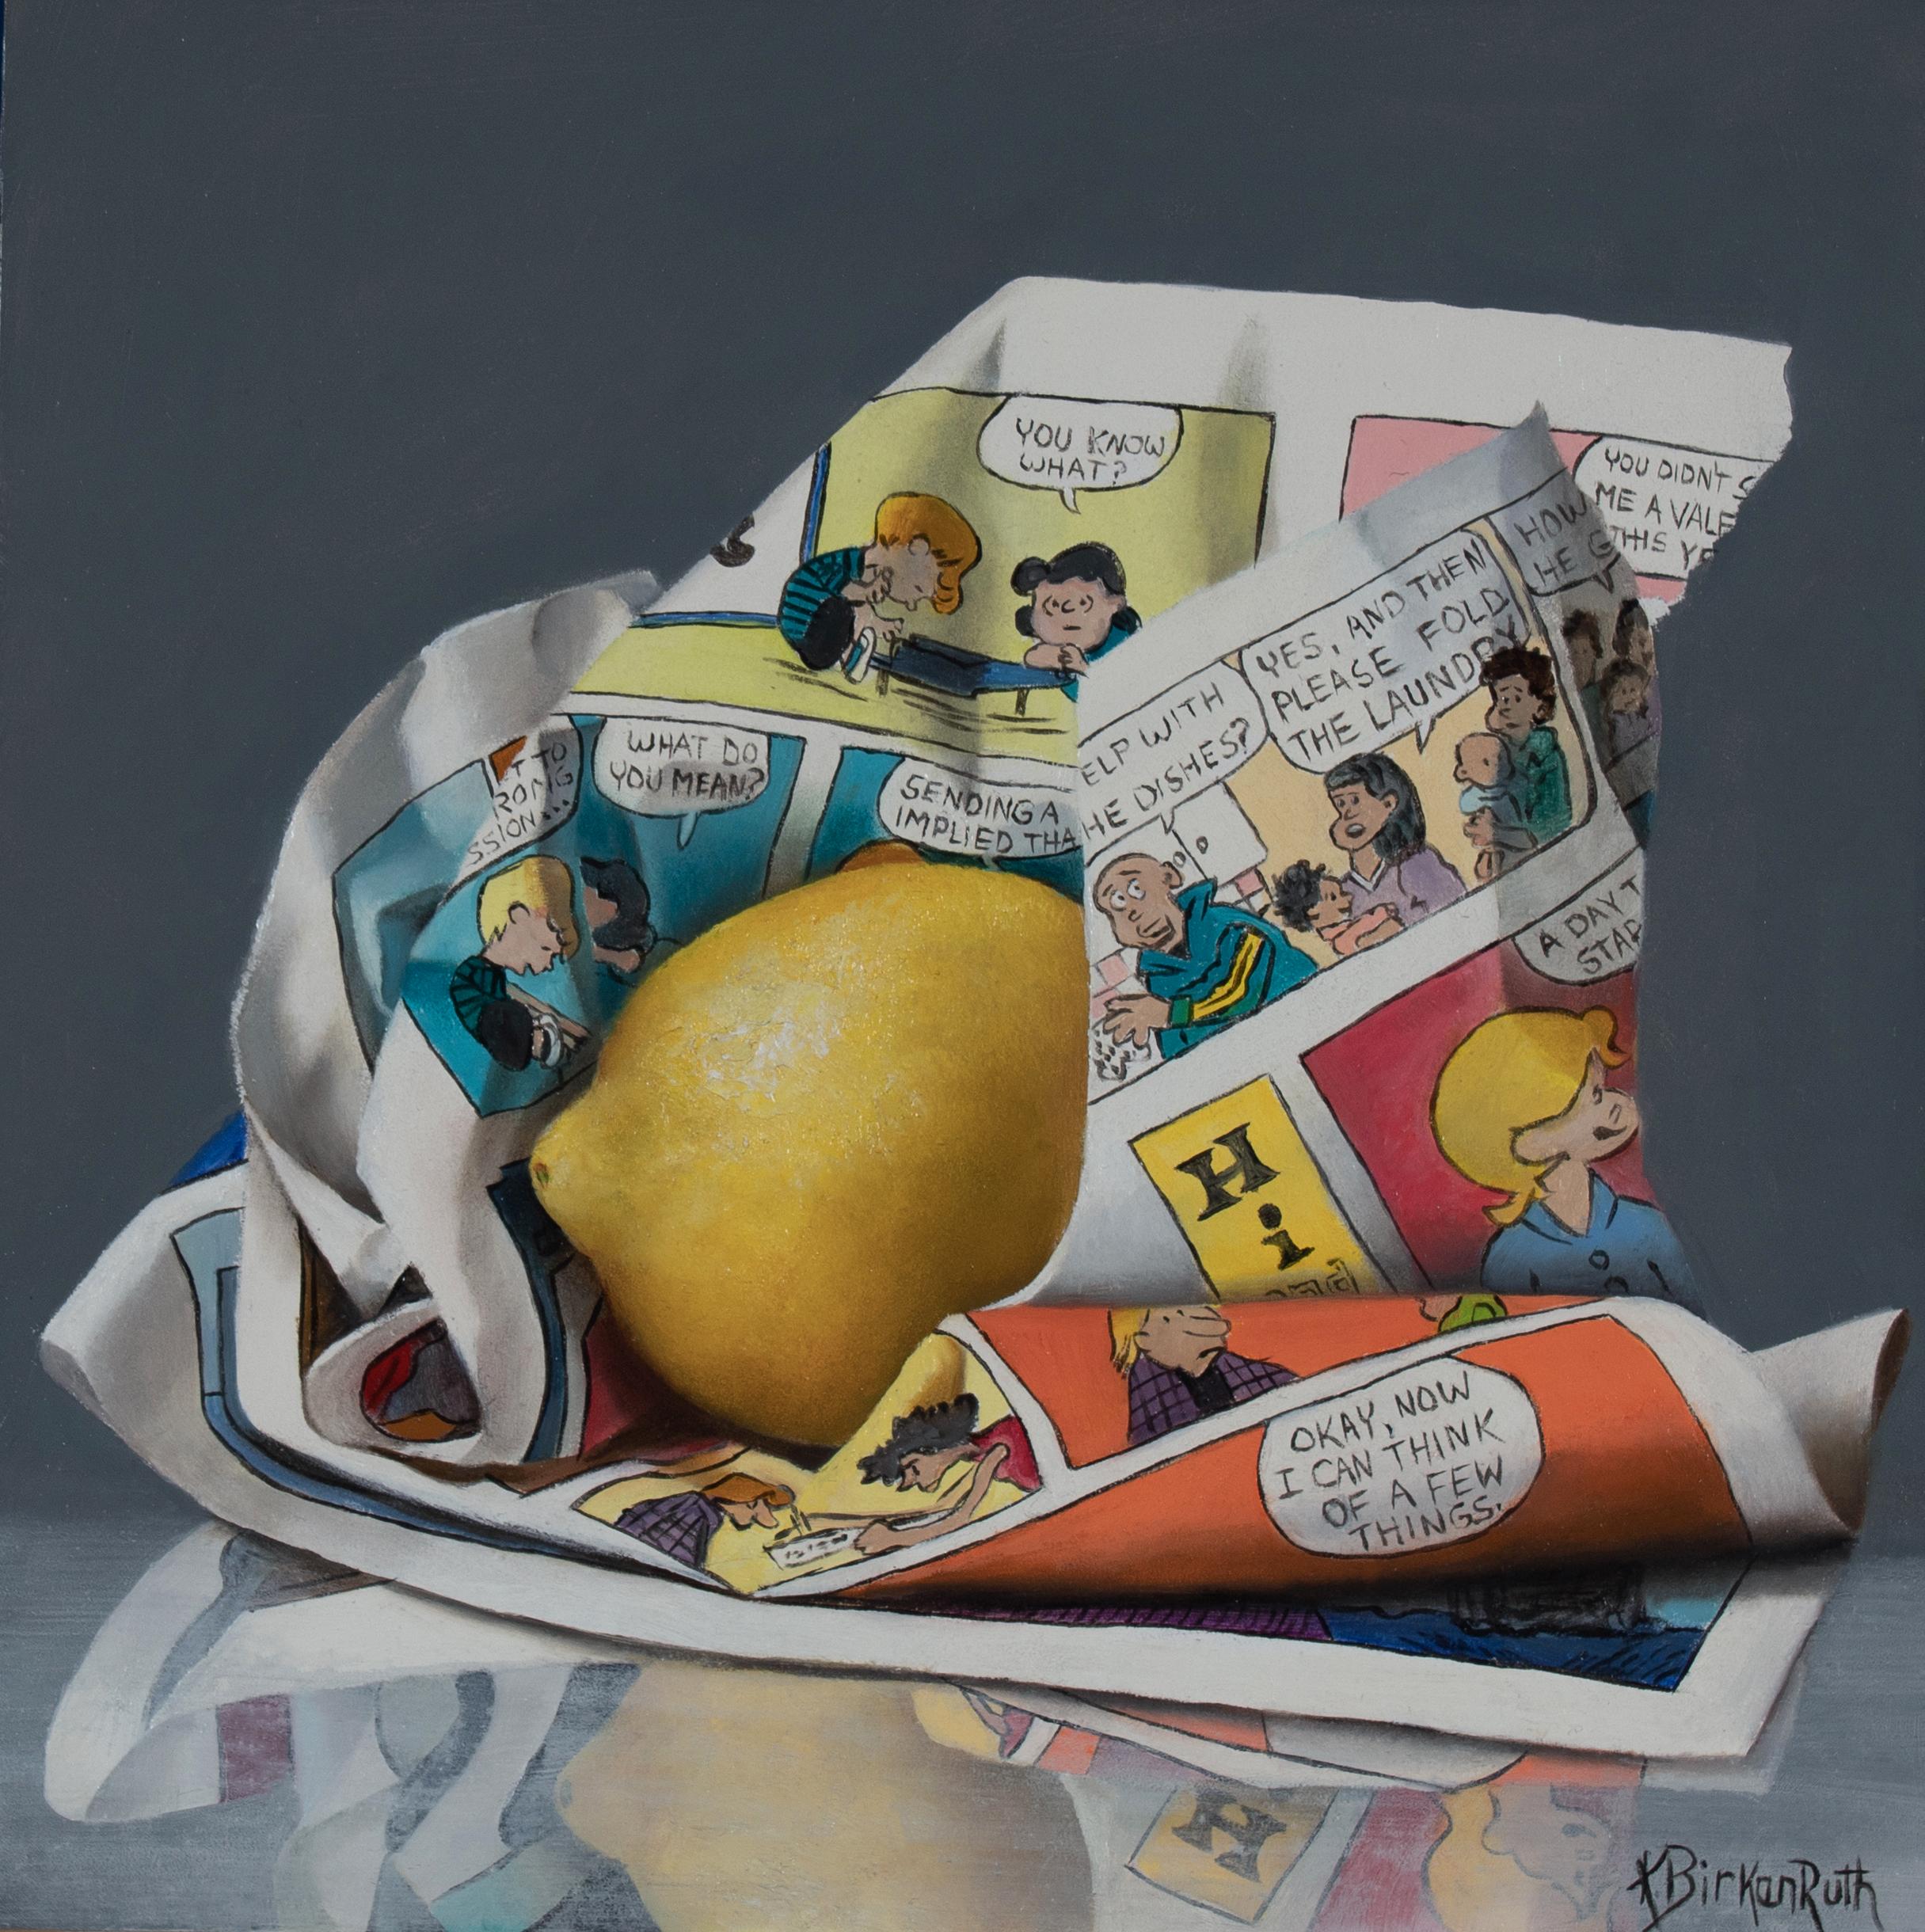 Kelly Birkenruth's "A Silly Citrus" (2023) is an original oil painting on panel, measuring 8 x 8 x 2 inches. This playful still life features a lemon wrapped in a colorful comic strip, showcasing Birkenruth's exceptional attention to detail and